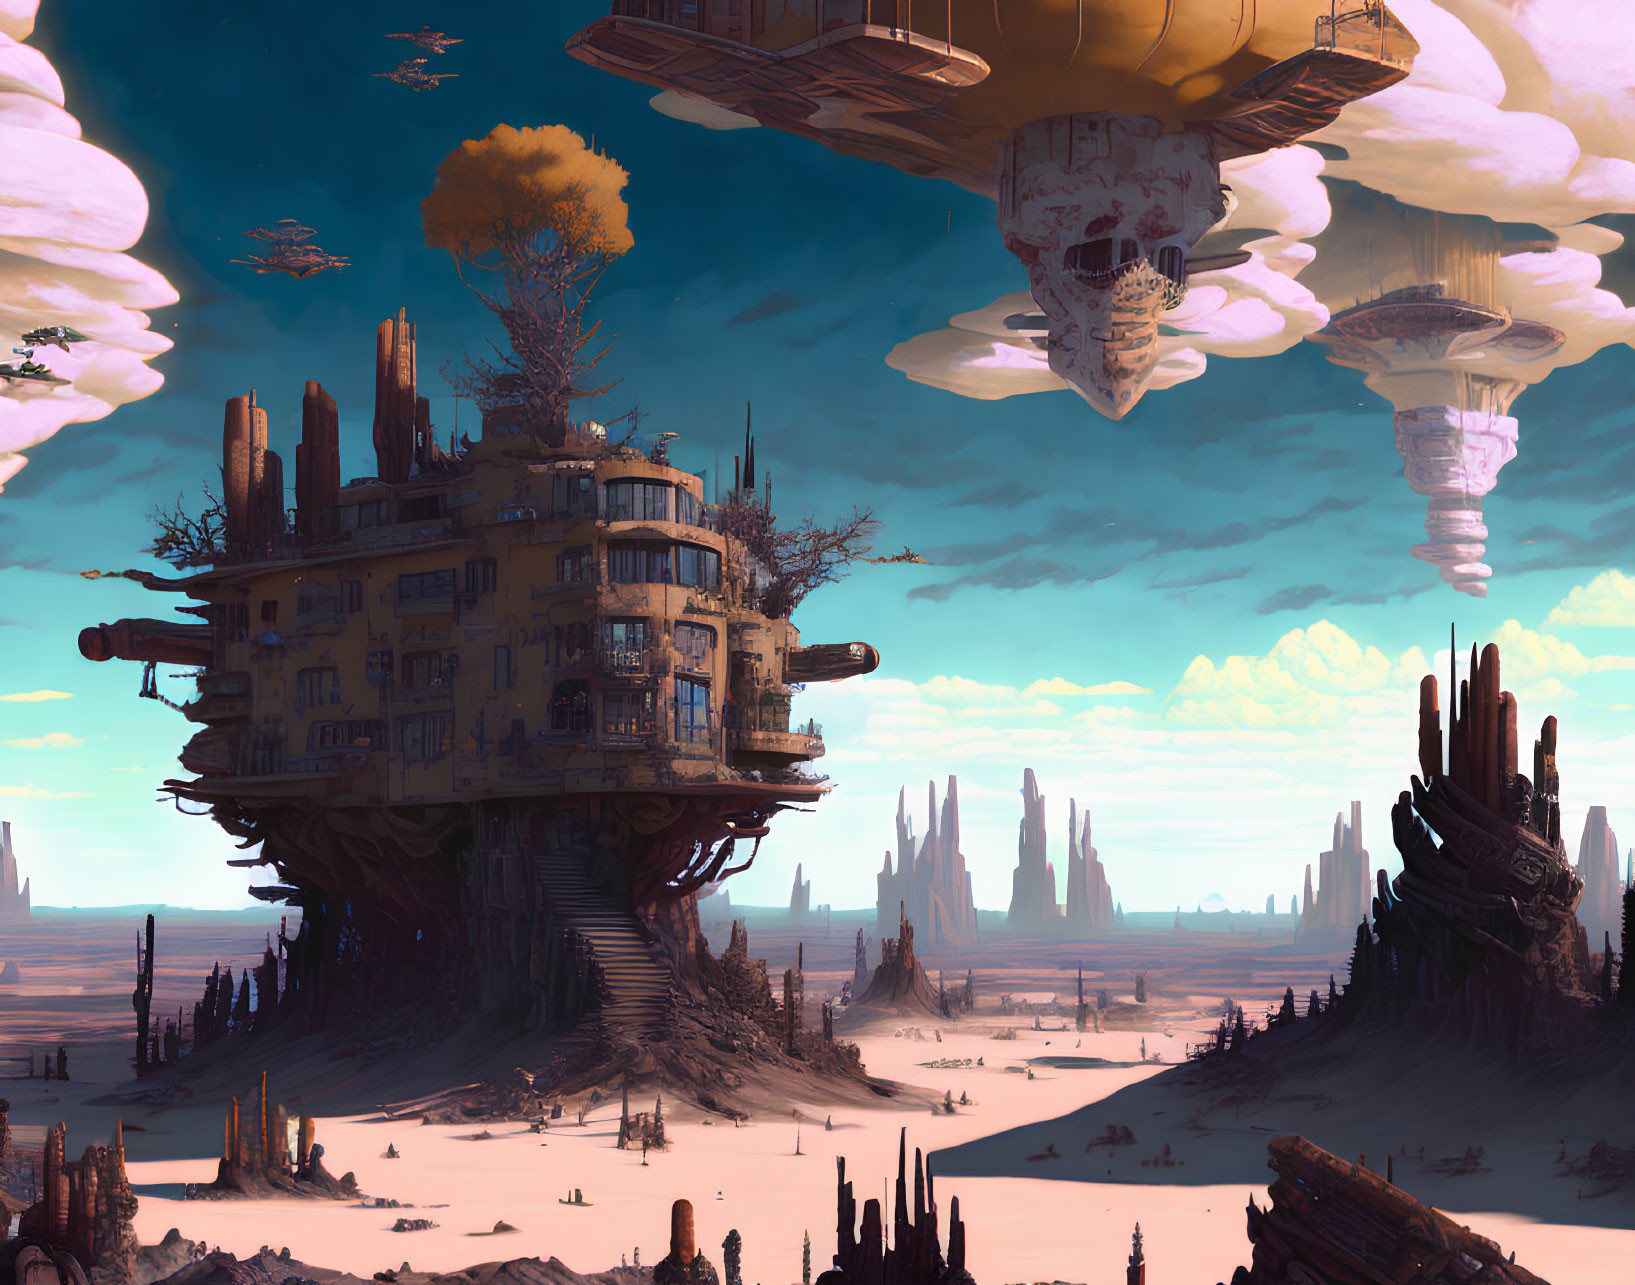 Futuristic floating cities above desert with rock formations and lone tree